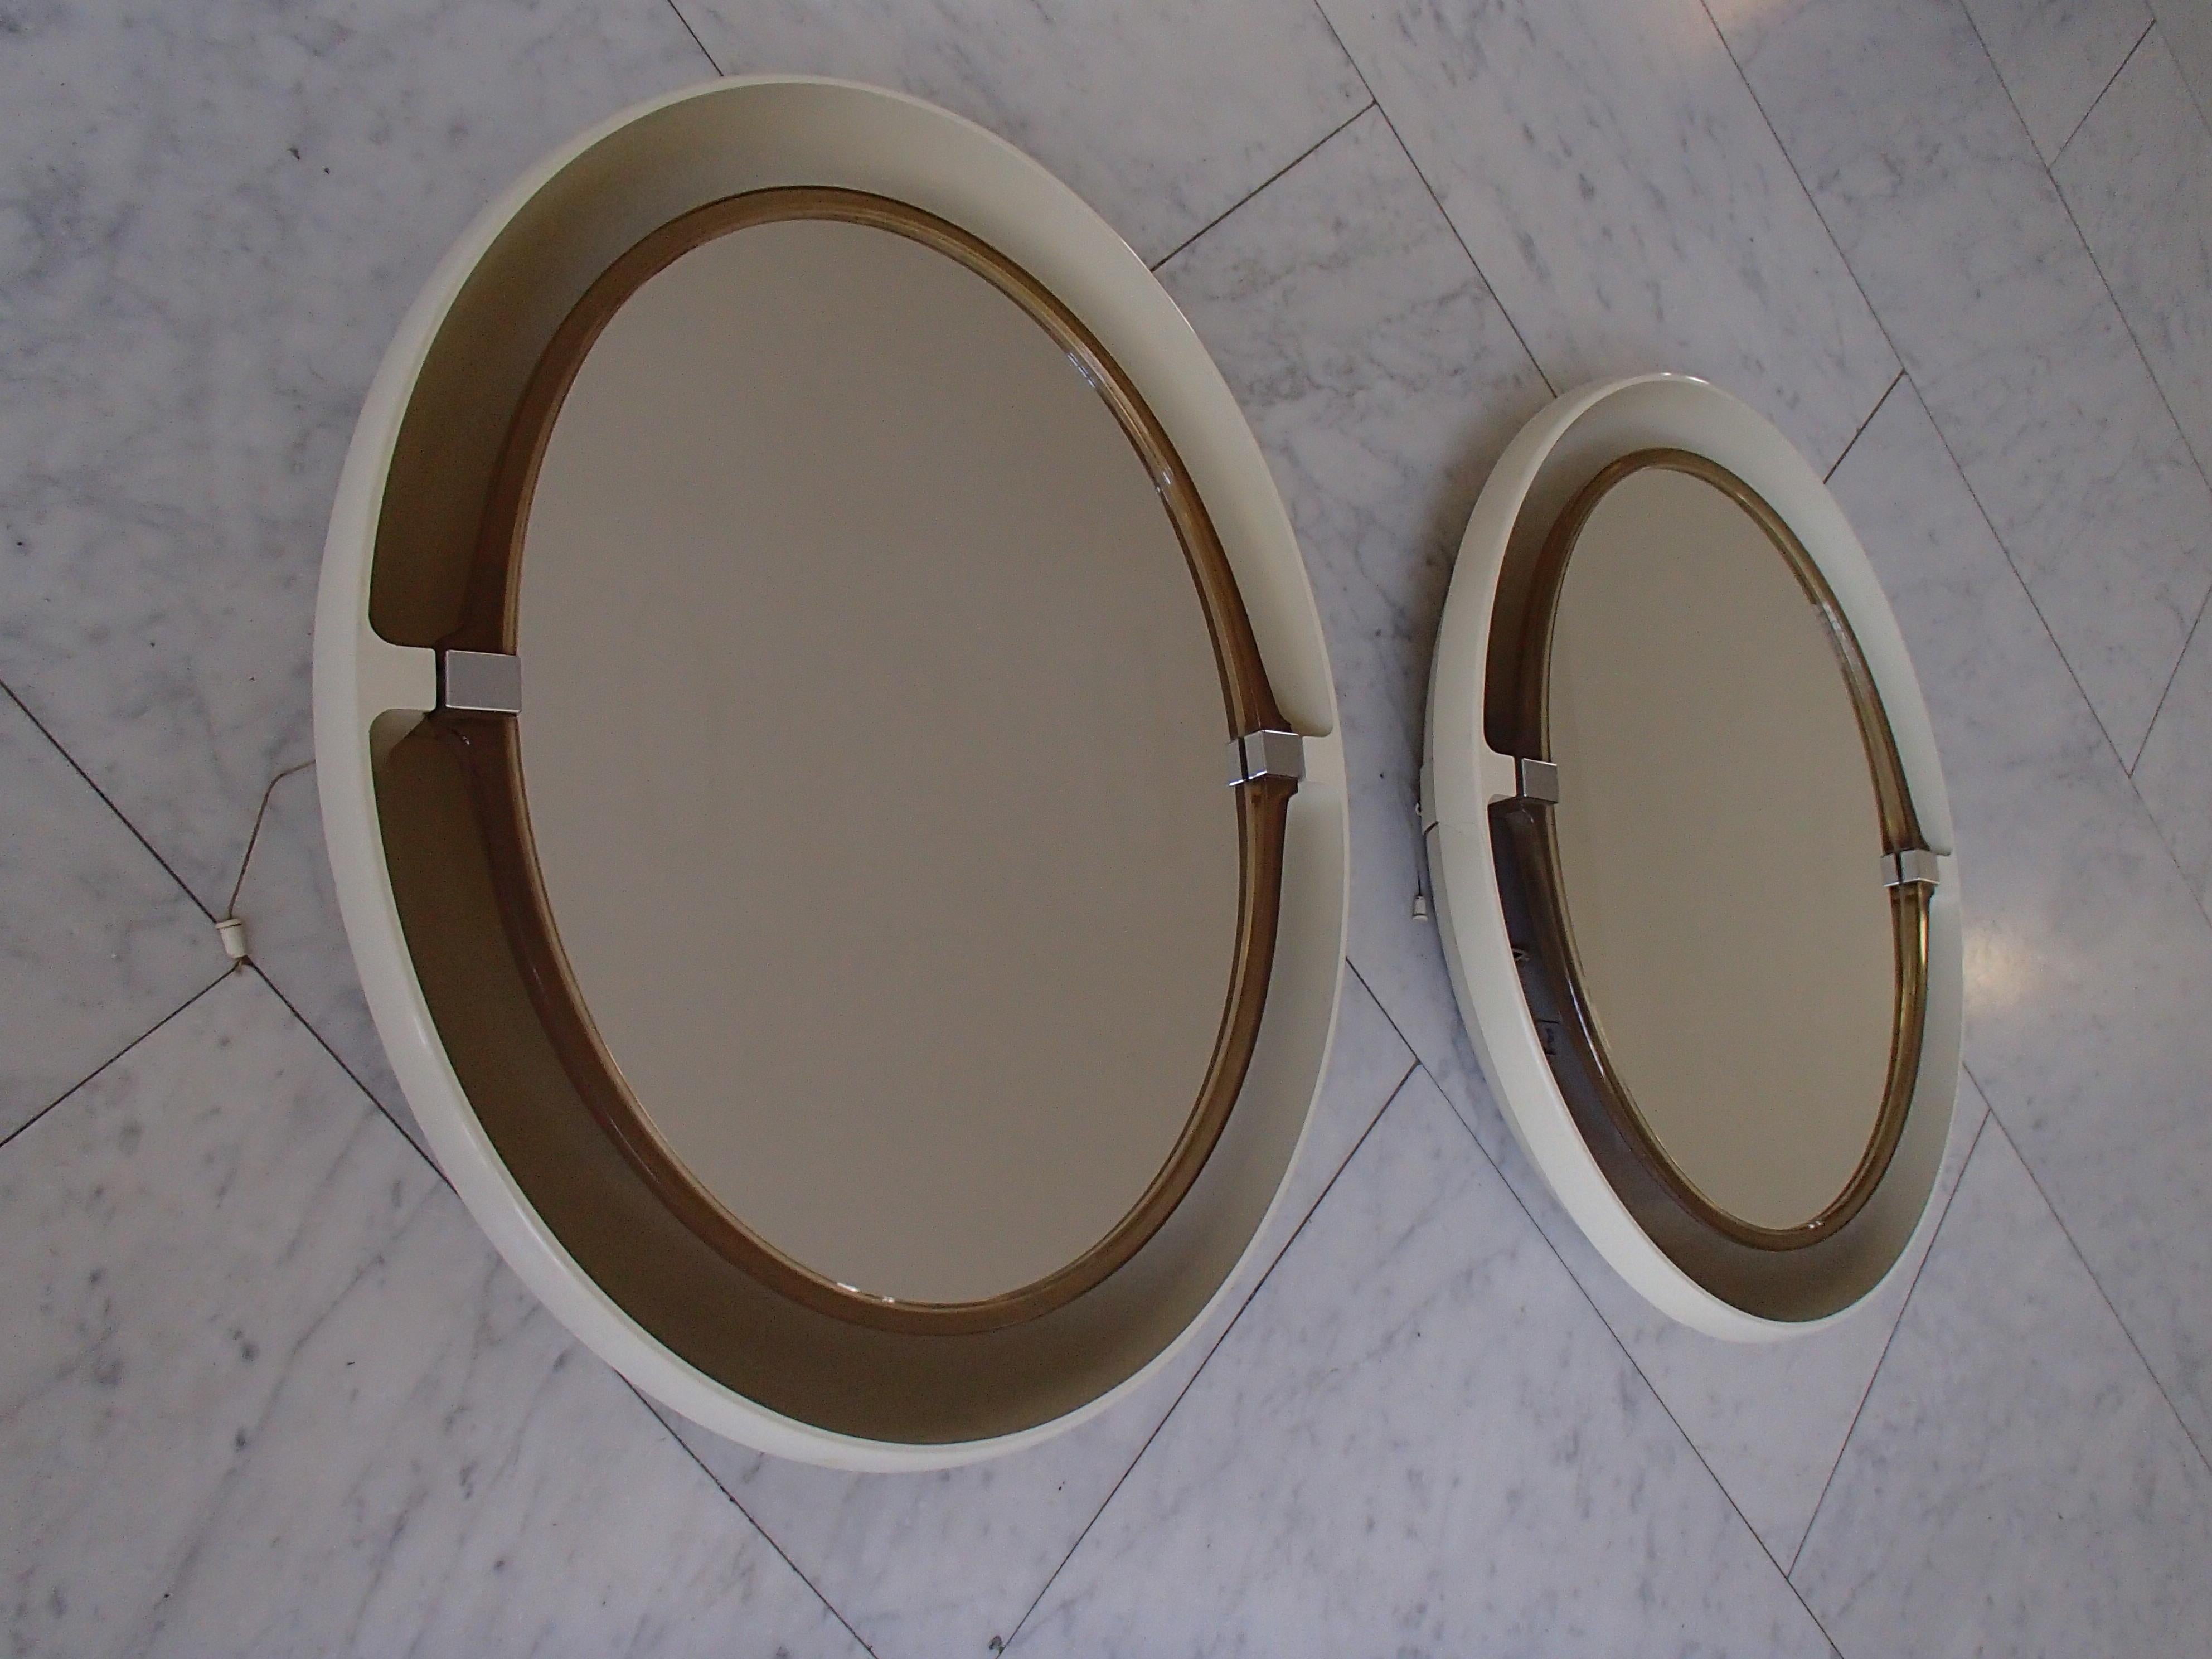 Pair of midcentury oval movable bathroom mirrors with 4 bulbs.